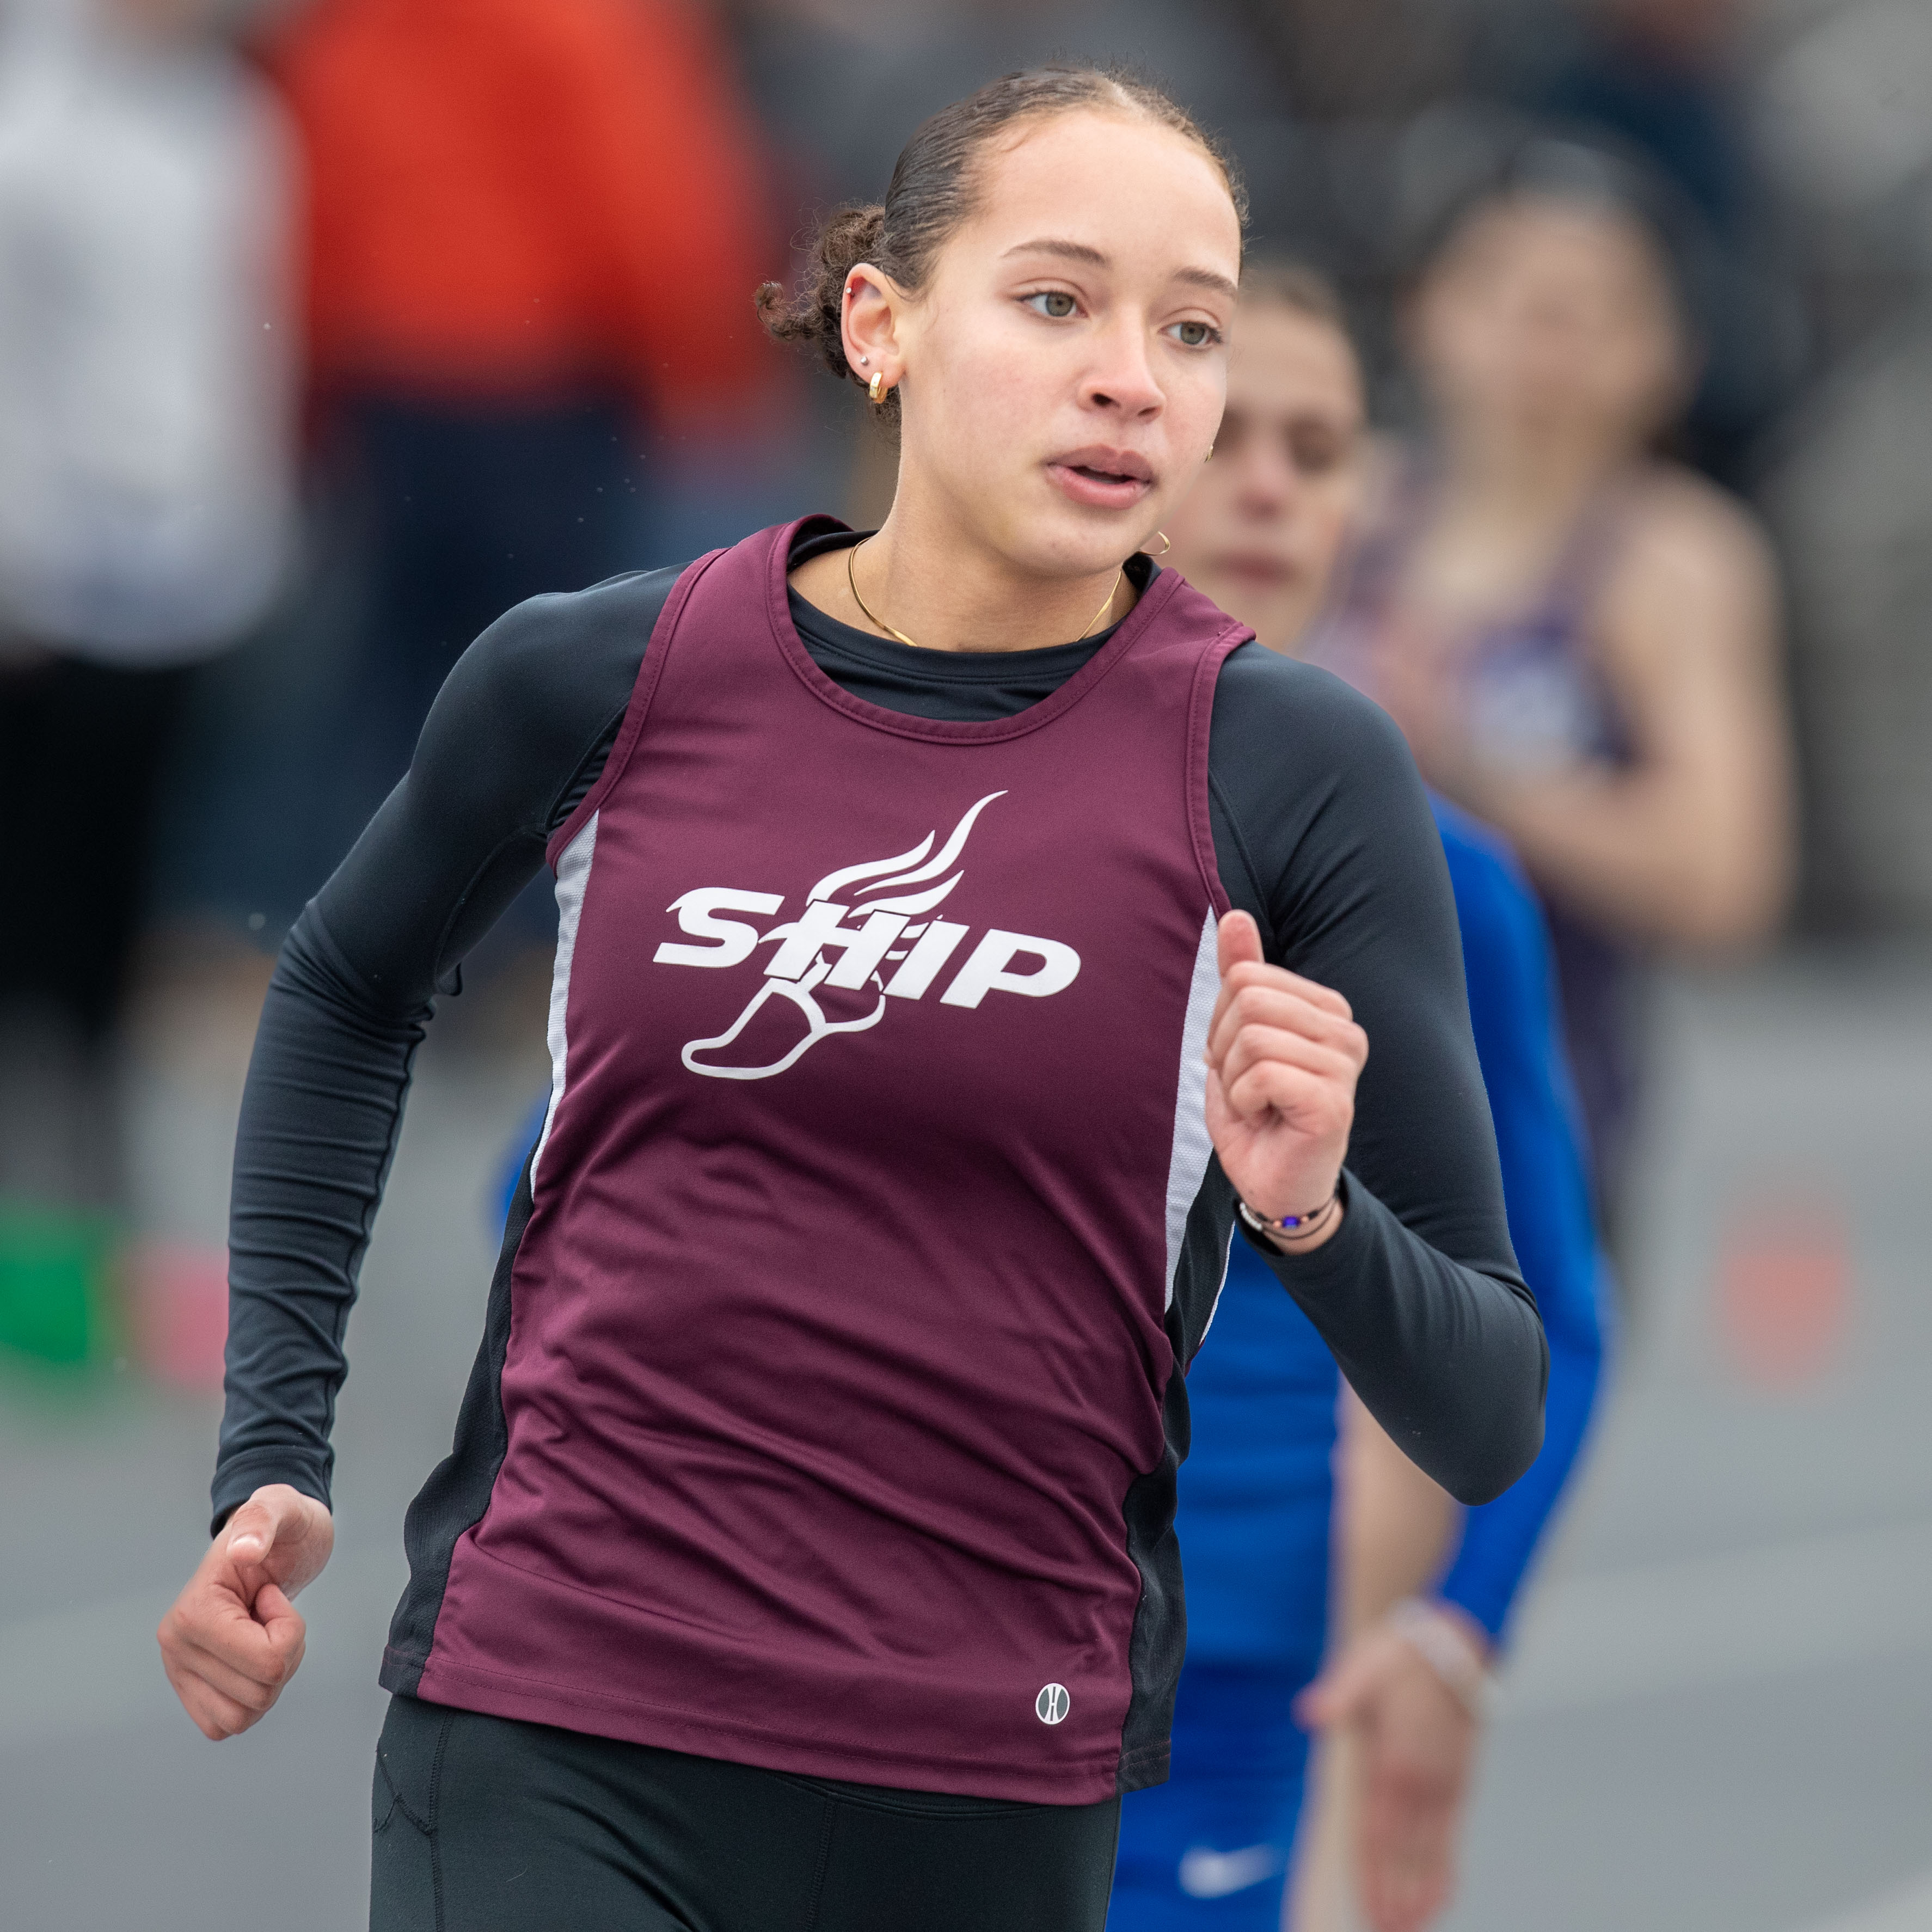 Shippensburg’s Jullian Sydnor finishes second in the 400 meter race at the 2023 Tim Cook Memorial Invitational track & field meet at Chambersburg, Pa., Mar. 25, 2023.Mark Pynes | pennlive.com